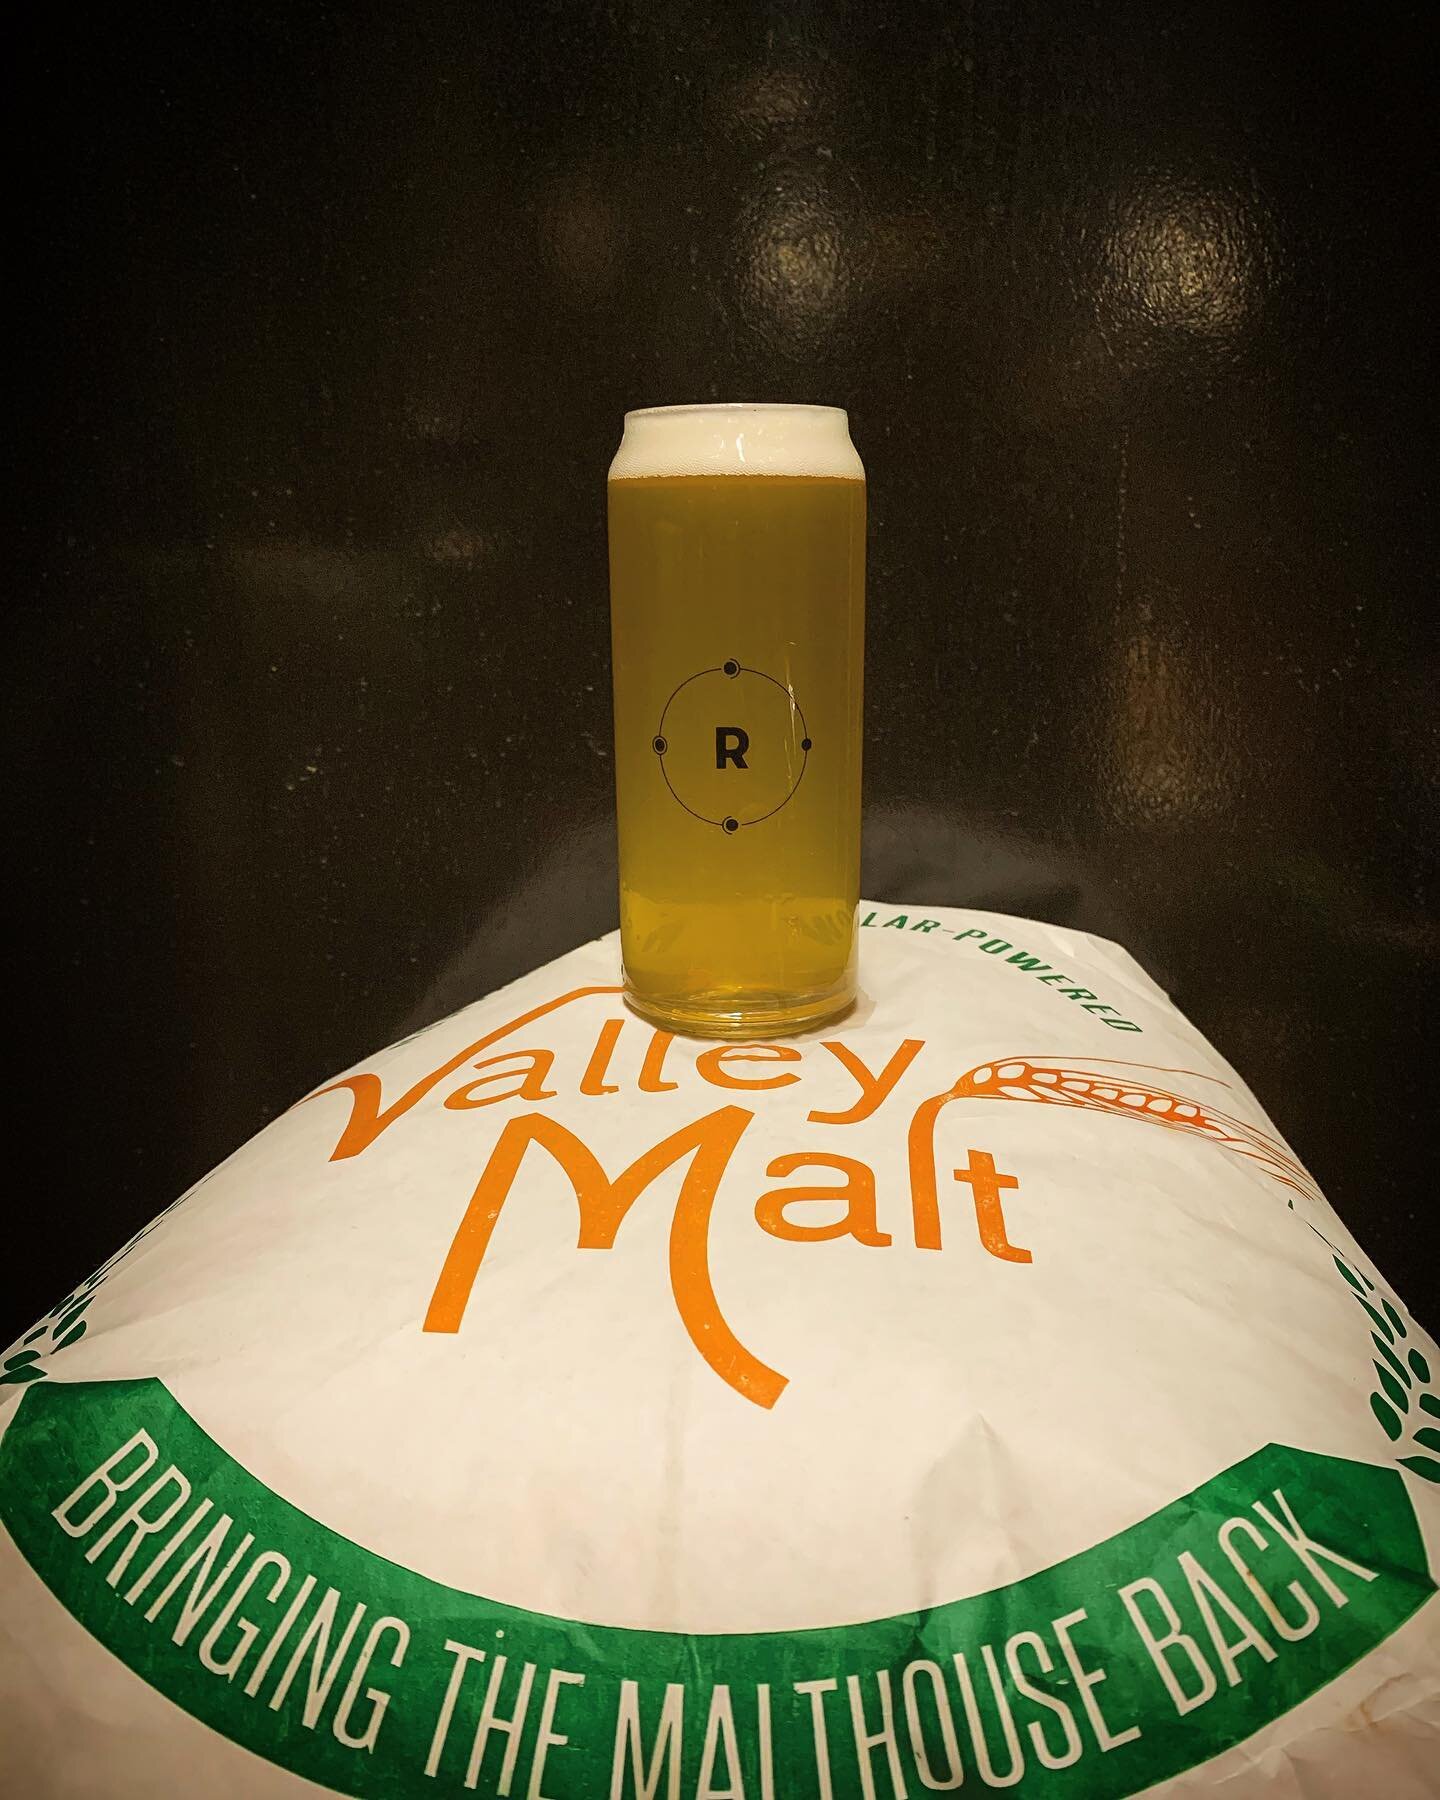 We are celebrating #massbeerweek with new lager! Joyride features locally grown Pilsner malt from our pals @valleymalt and a hefty dose of German hop trio Mittelfuh, Grungeist, and Huell Melon for a springy snap. Our take on a classic hopped-lager st